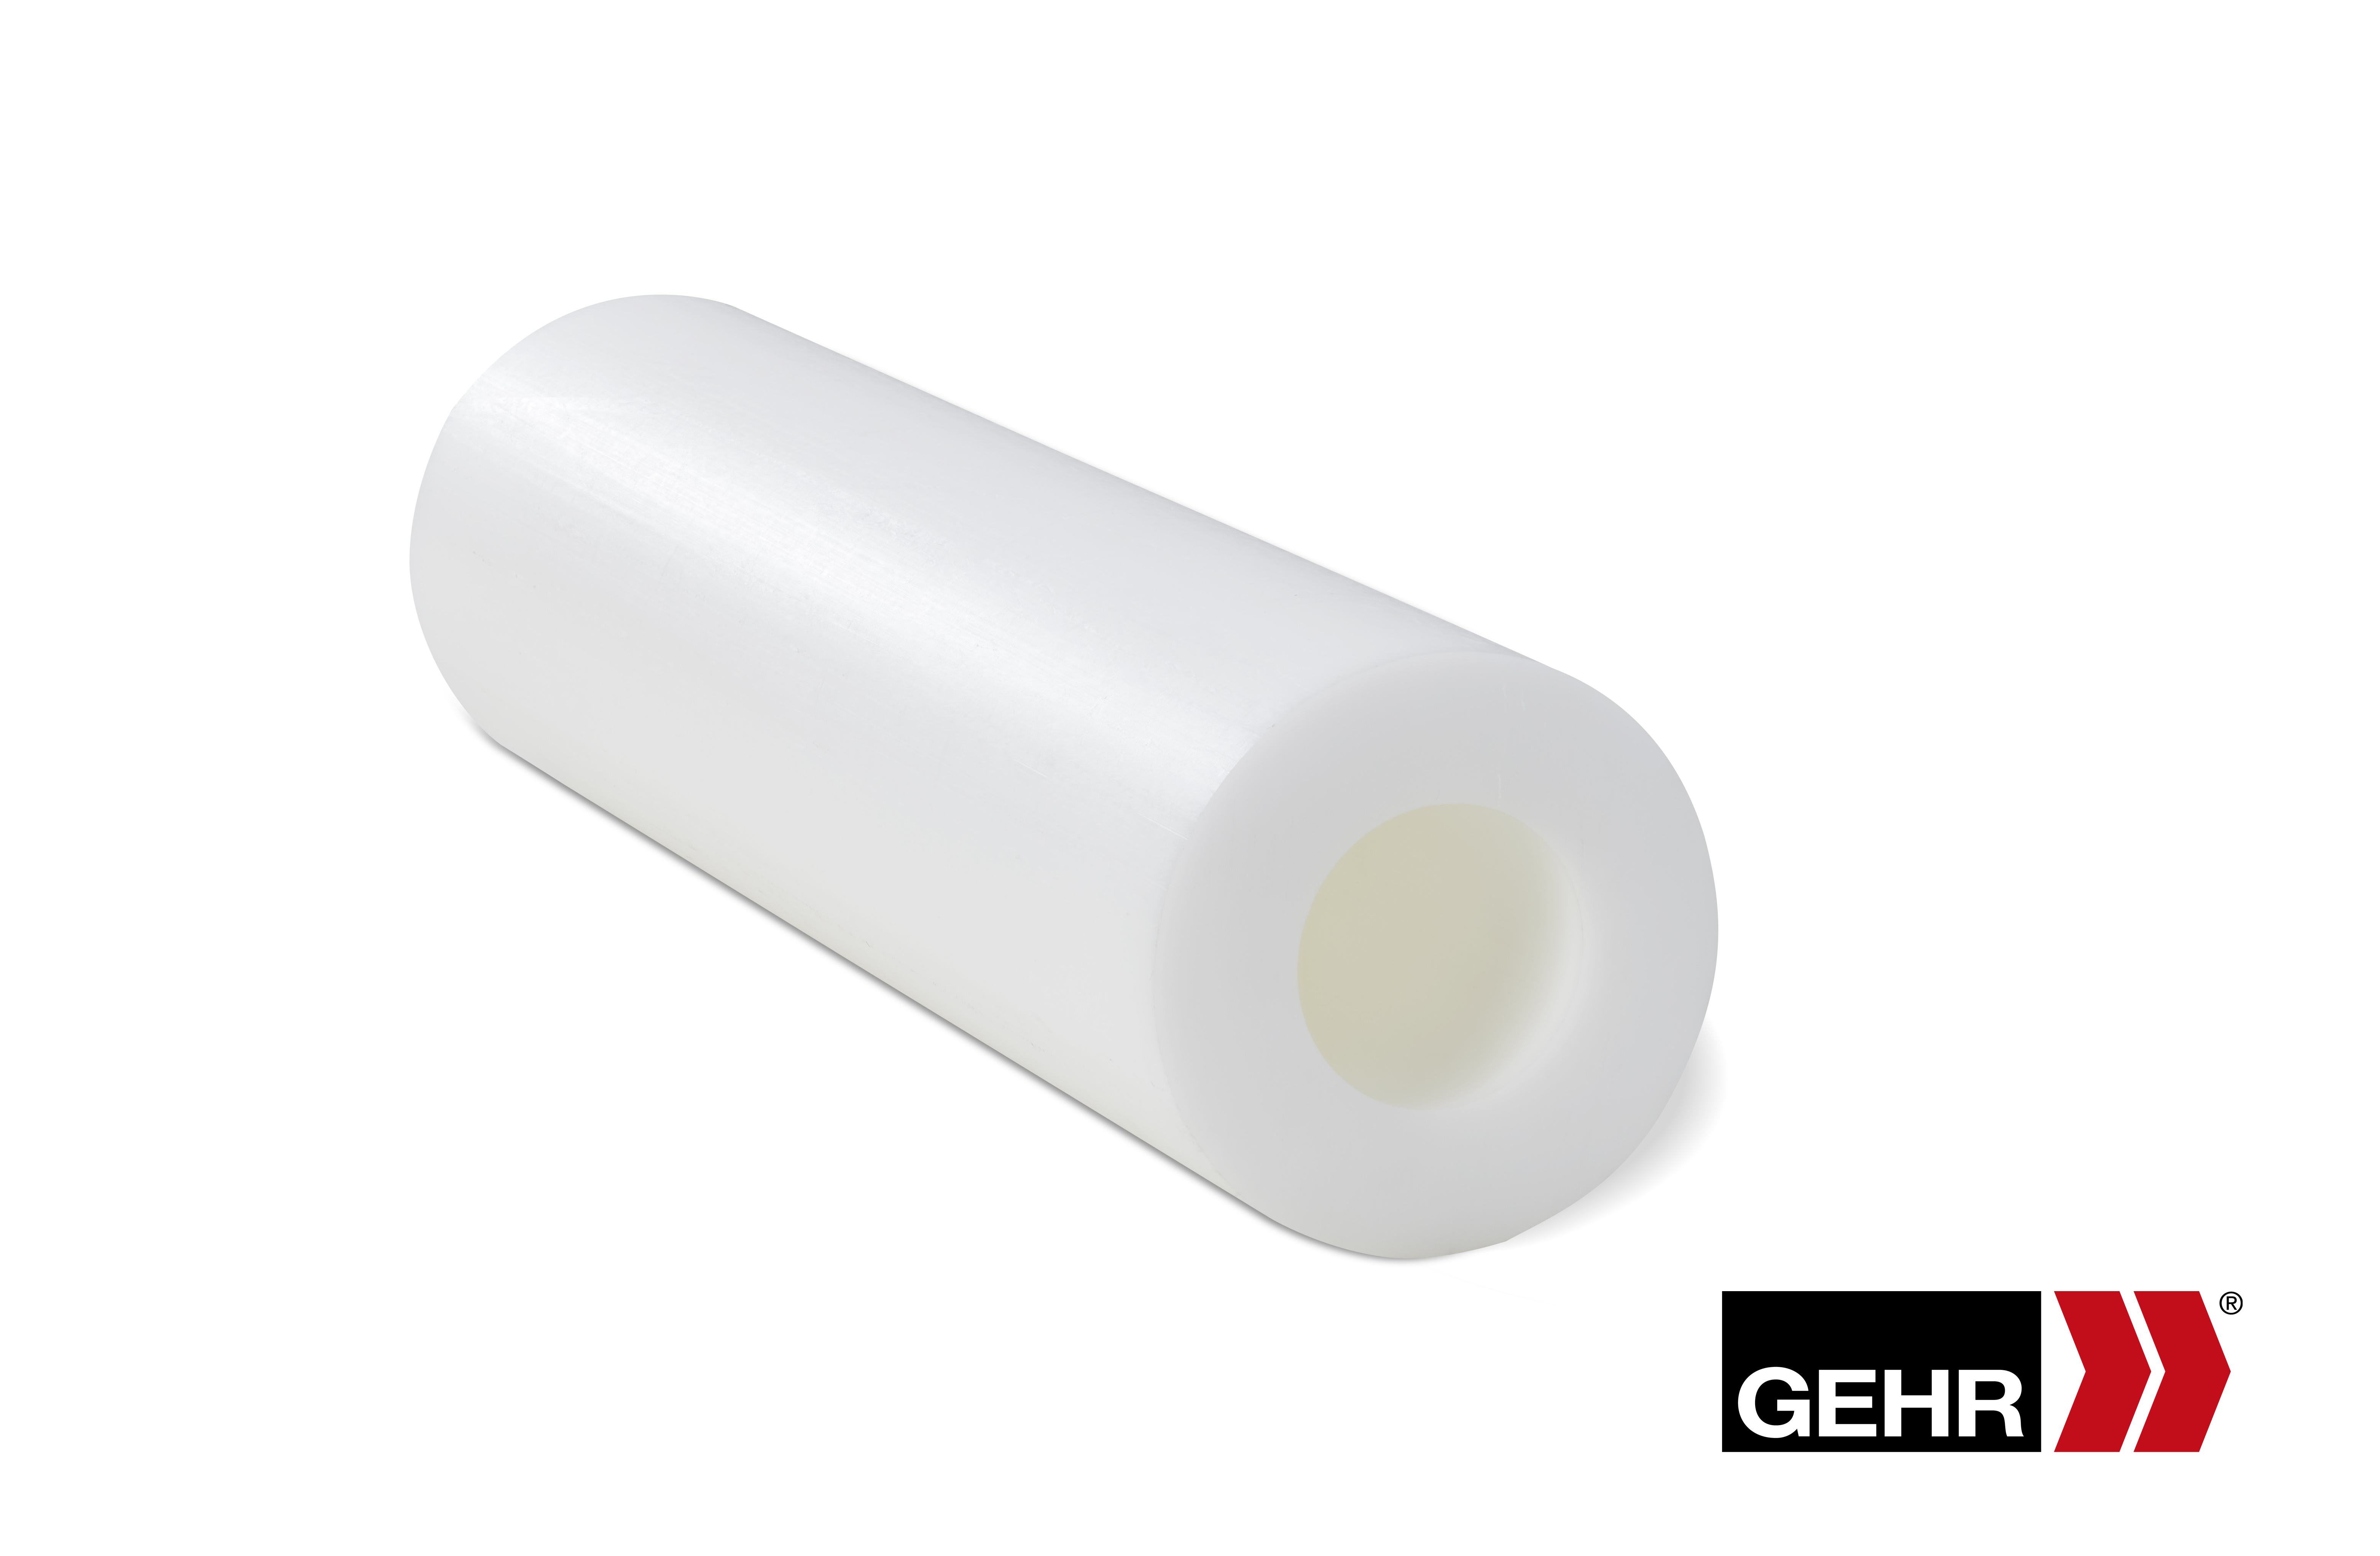 GEHR POM-C Hollow bars 100 x 50 mm natural